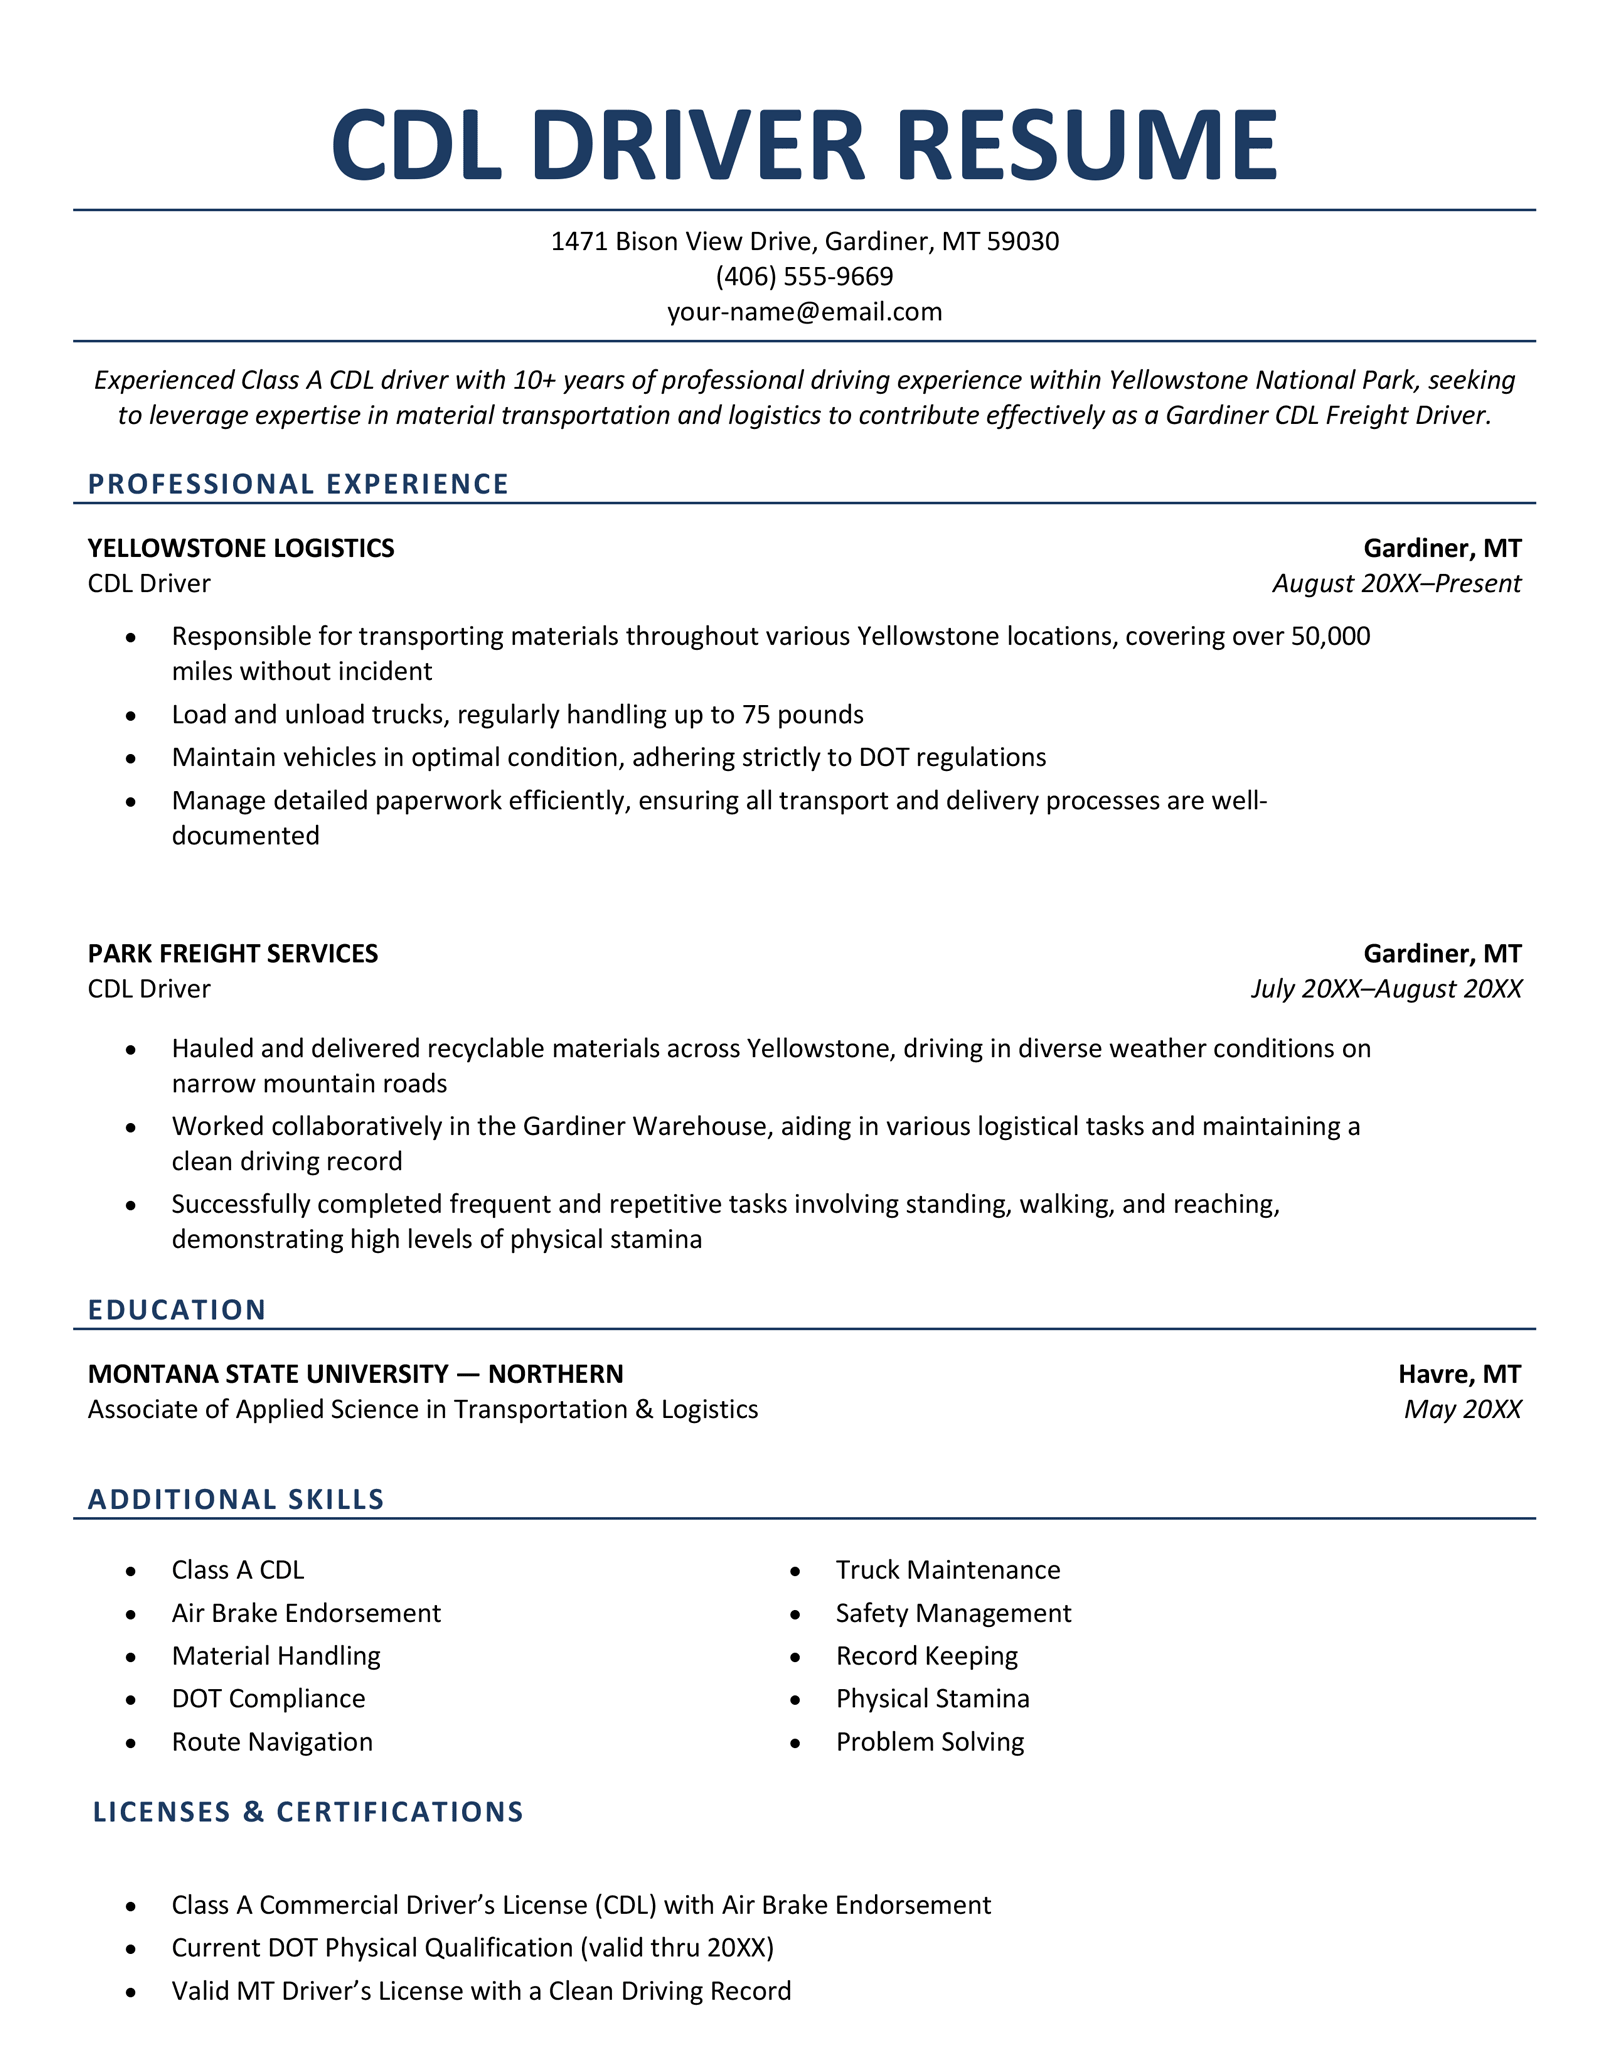 A CDL driver resume example that uses a professional, simple design in a blue color scheme.